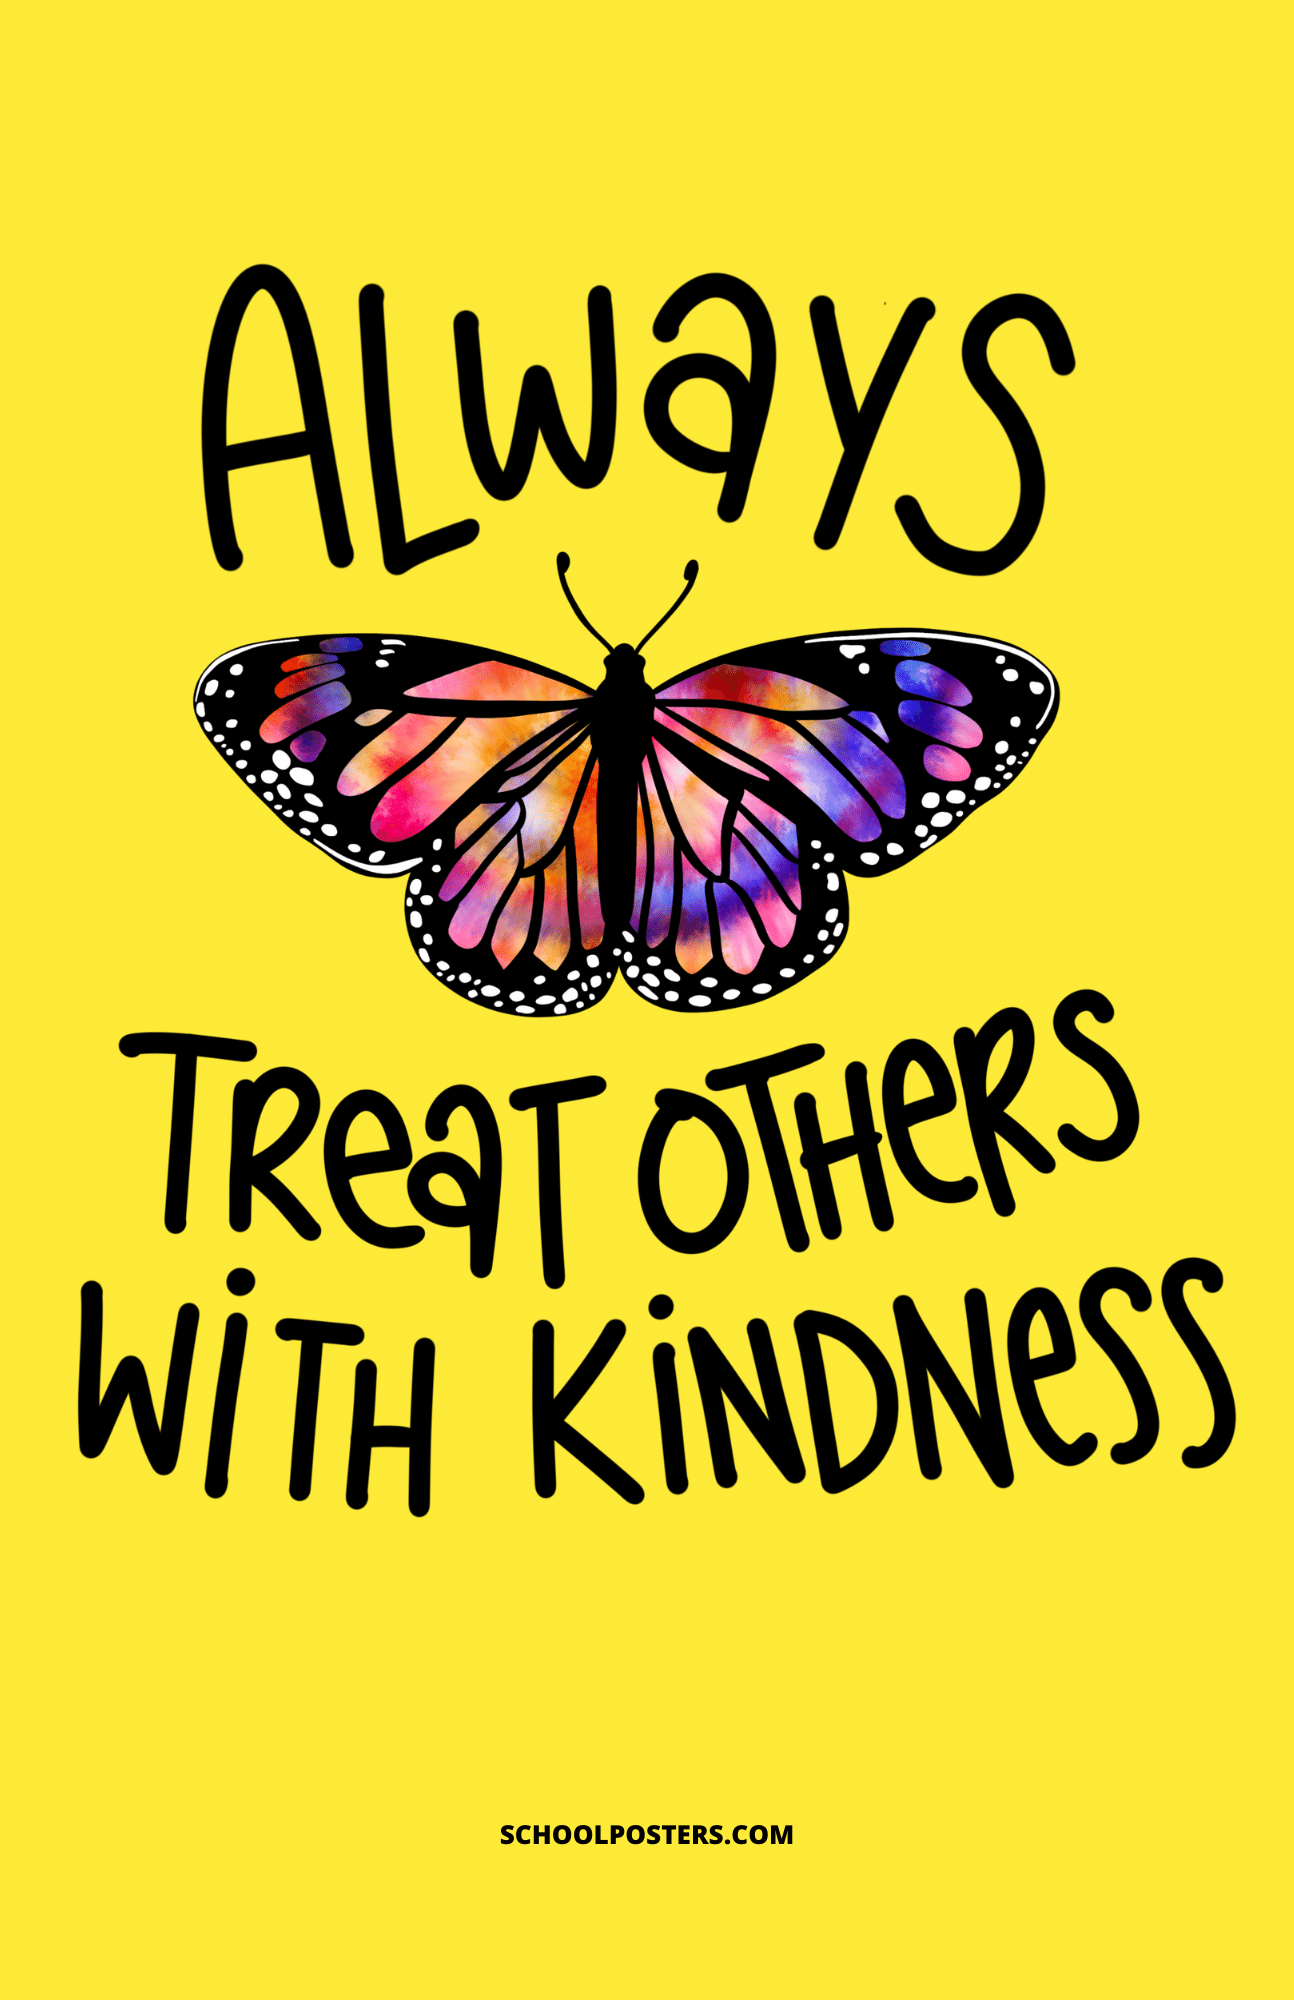 Always Treat Others With Kindness Poster